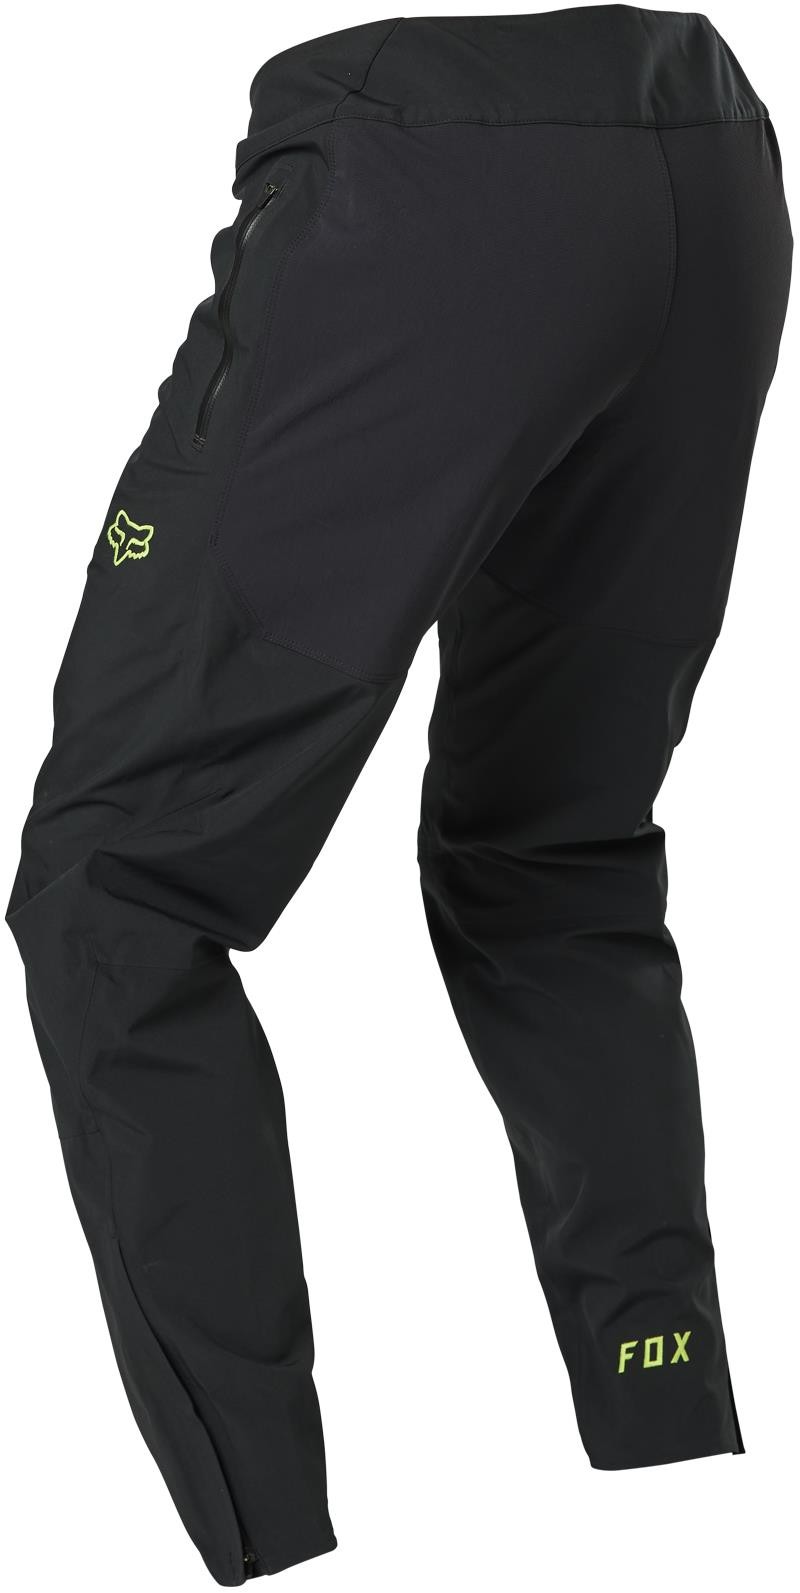 Defend 3L Waterproof MTB Cycling Trousers image 2